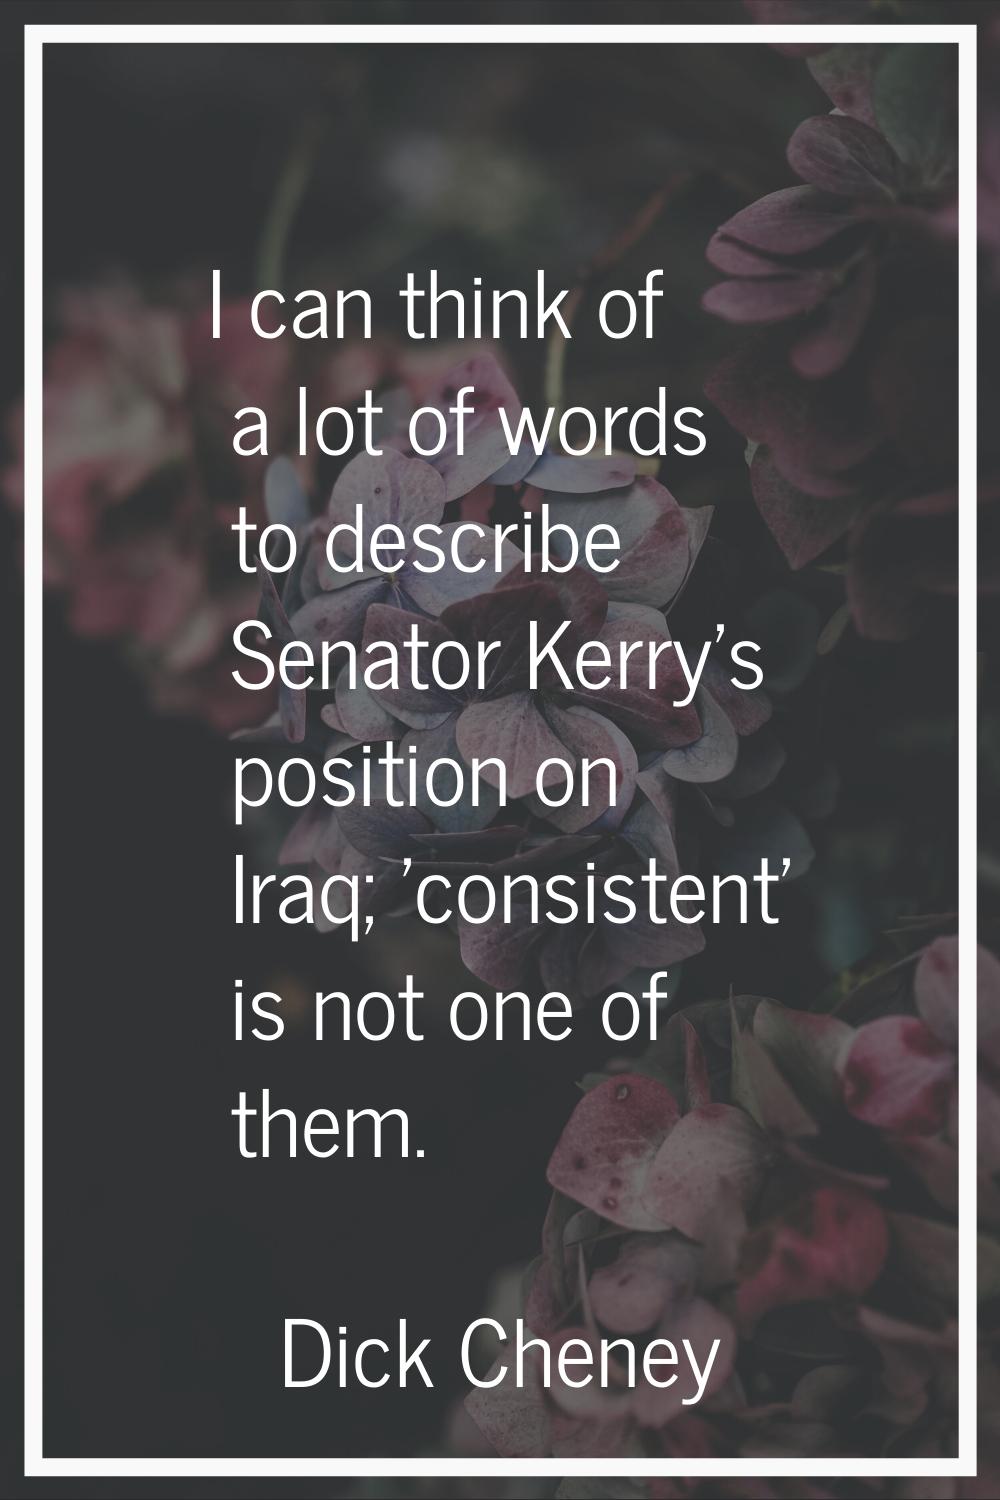 I can think of a lot of words to describe Senator Kerry's position on Iraq; 'consistent' is not one